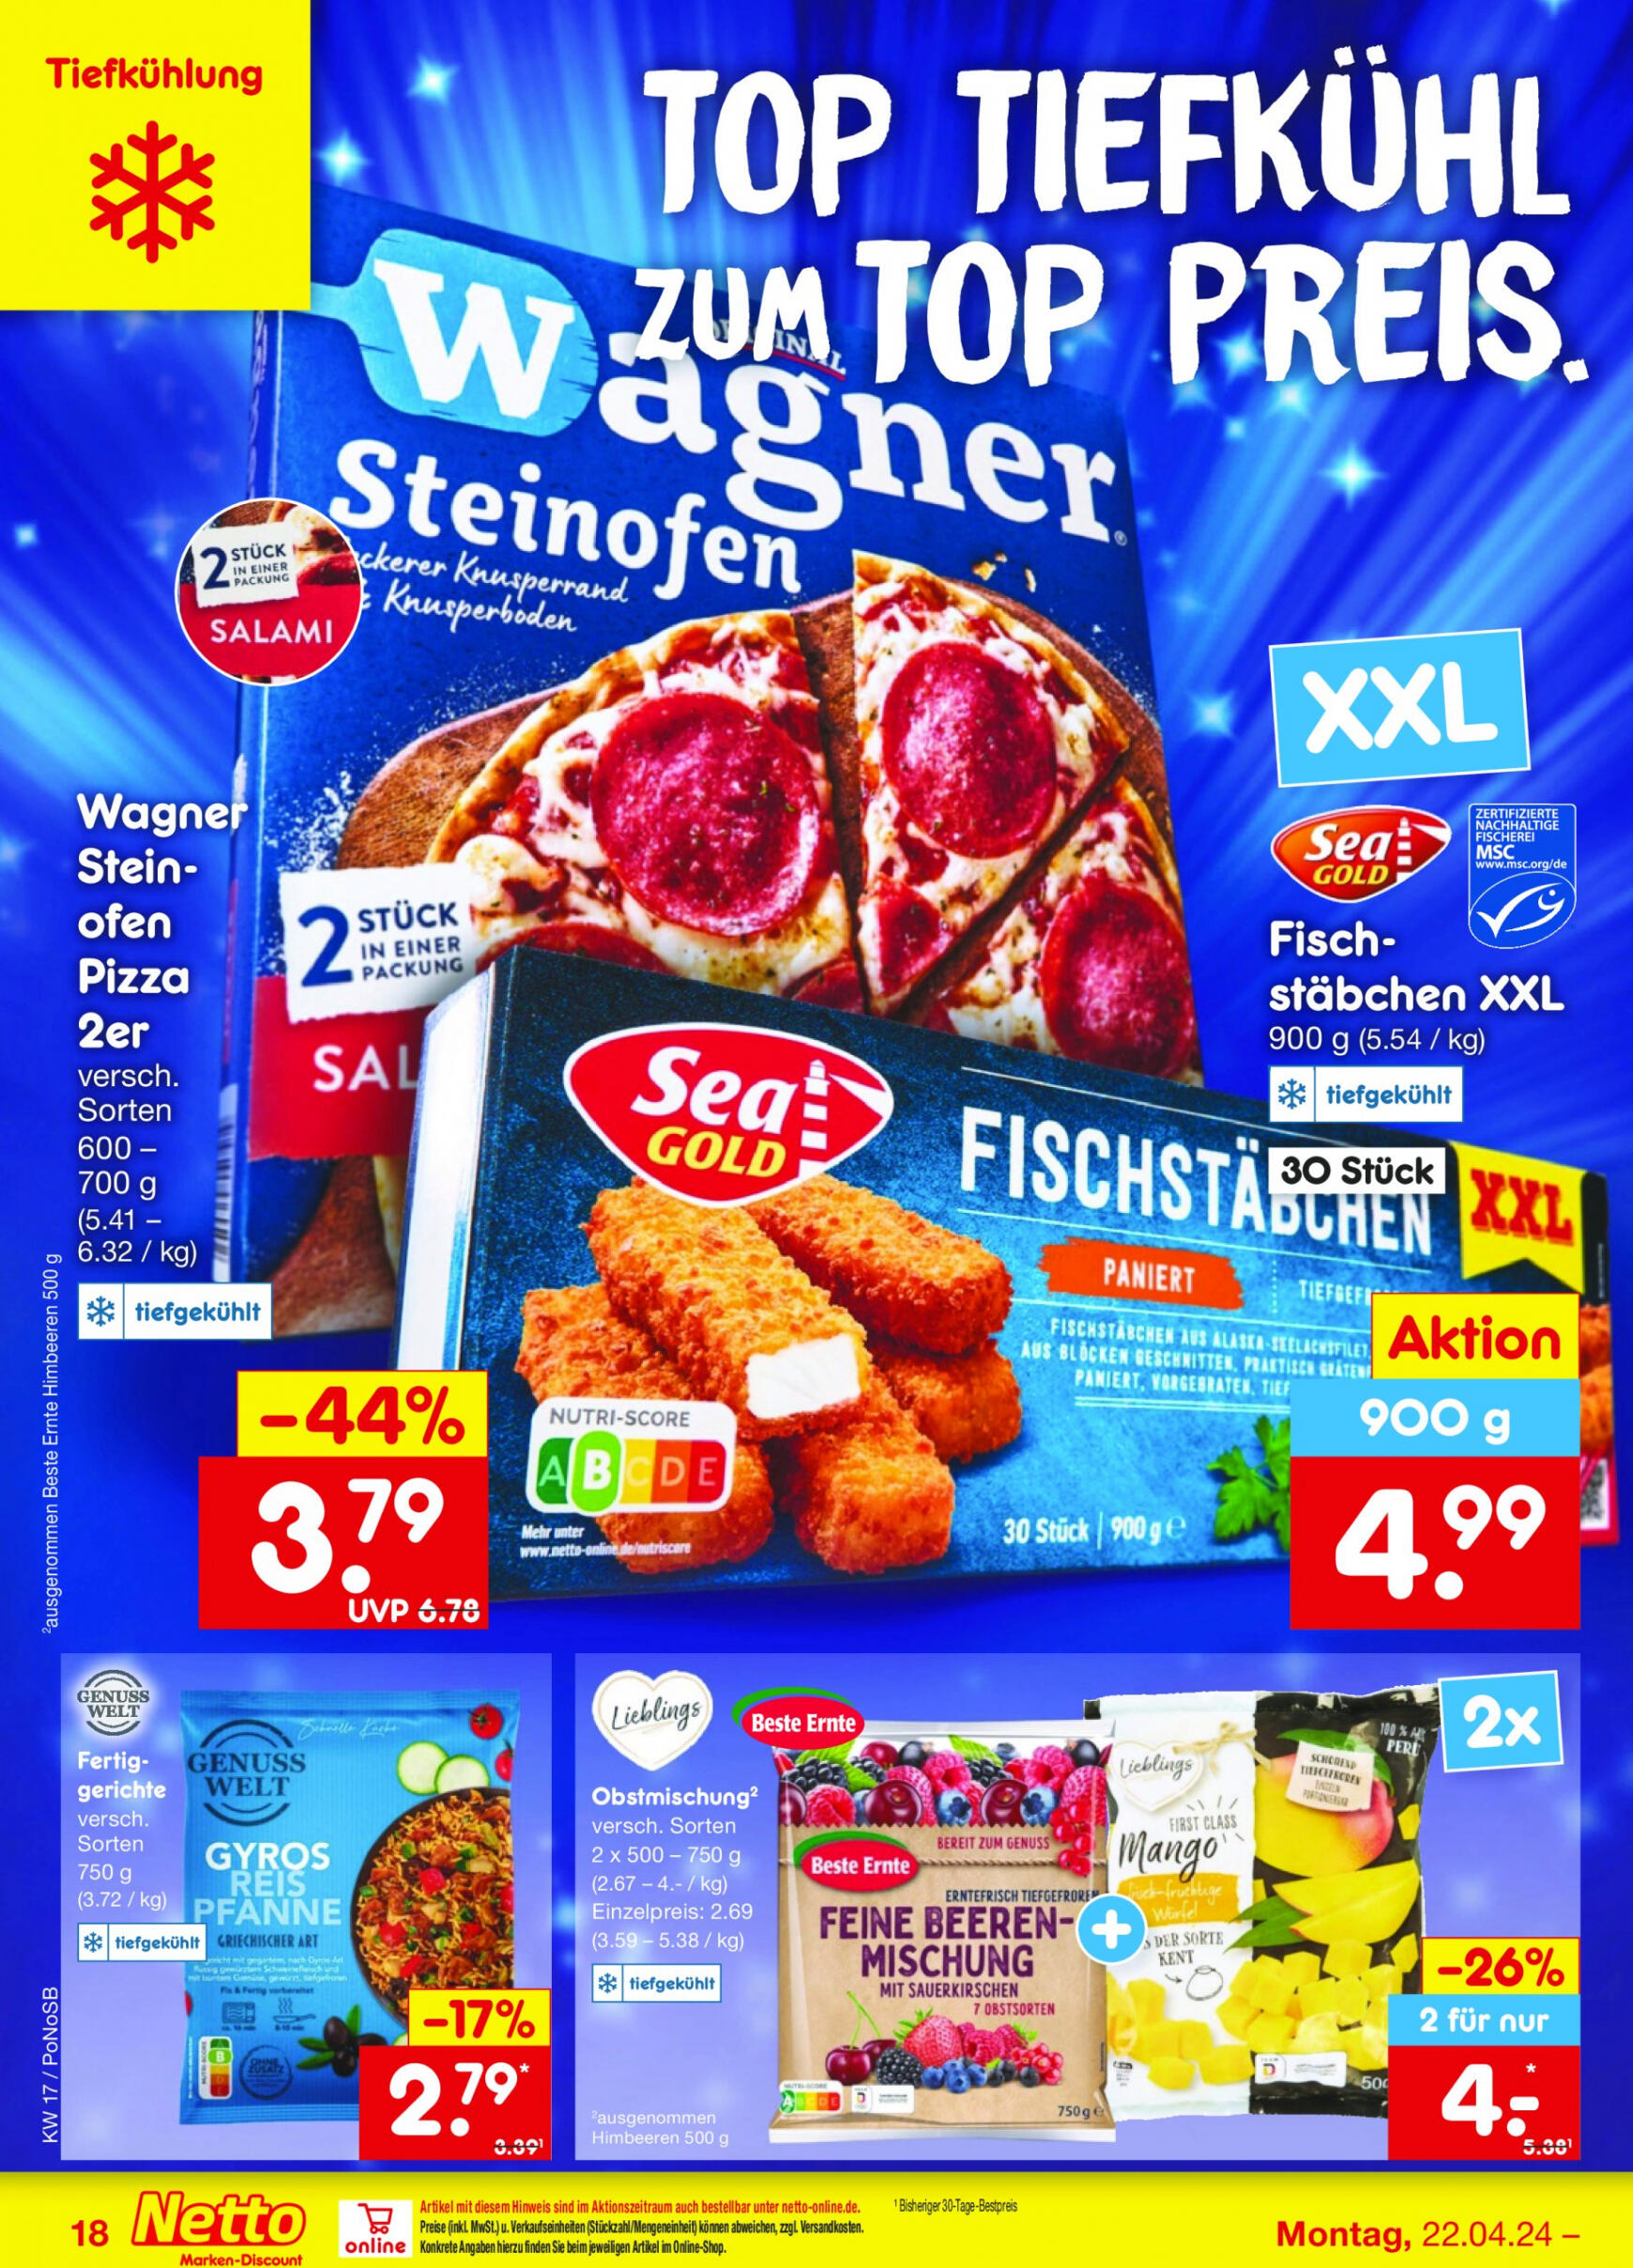 netto - Flyer Netto aktuell 22.04. - 27.04. - page: 20